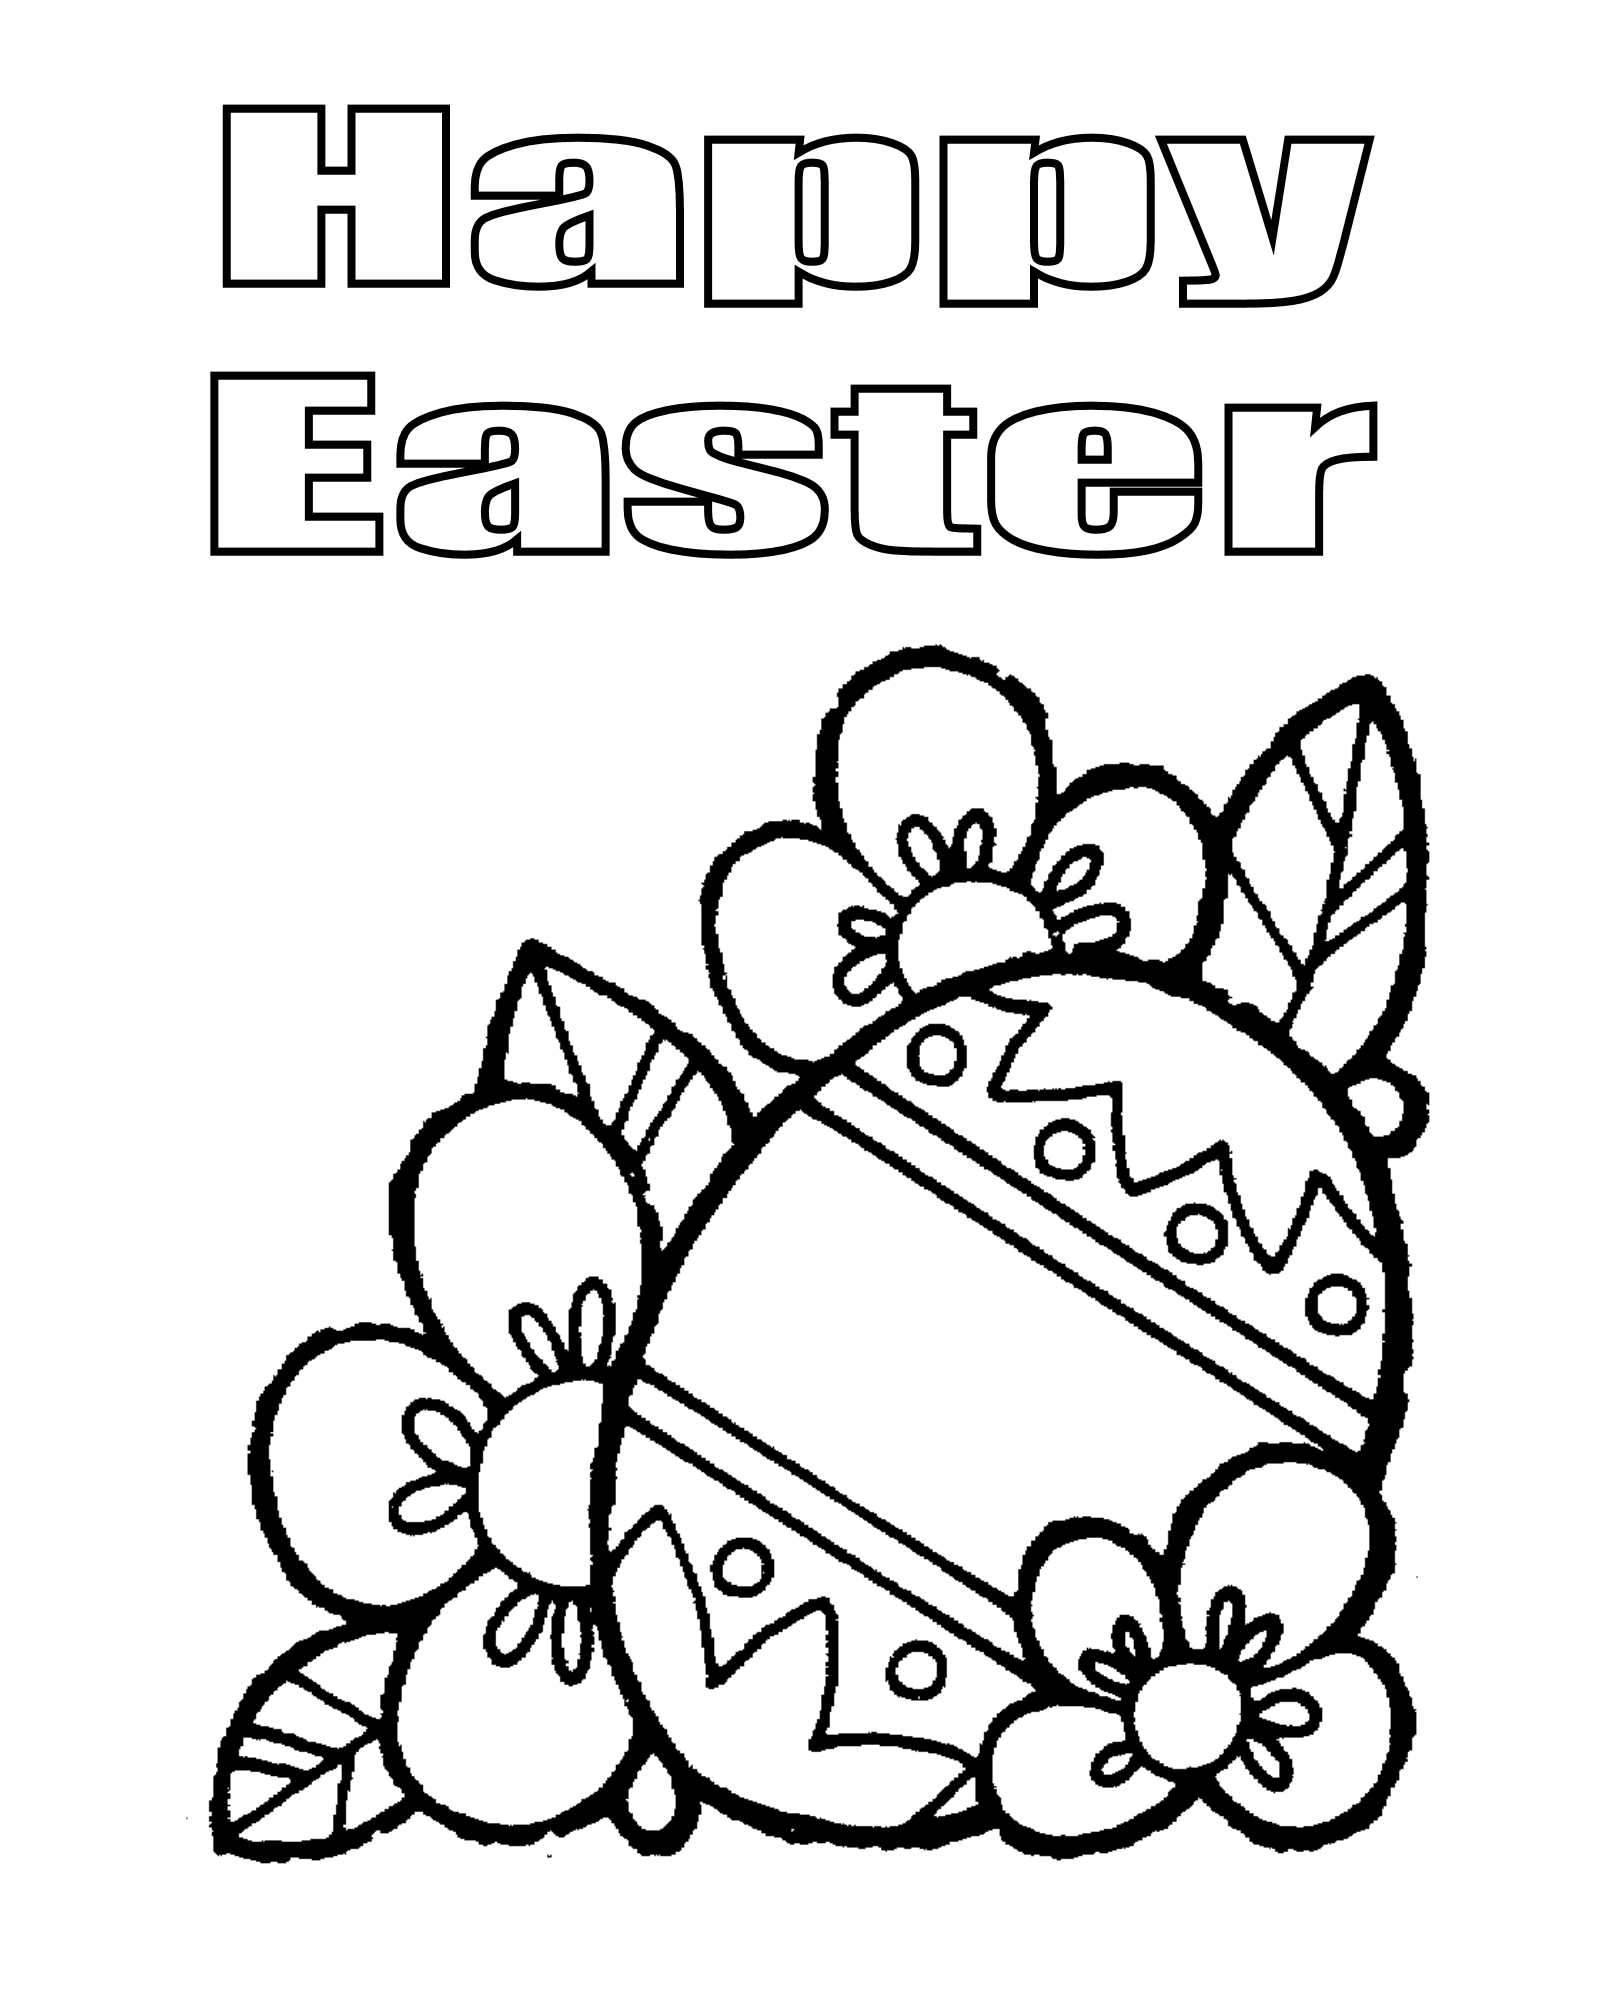 Happy Easter Coloring Pages Best Coloring Pages For Kids